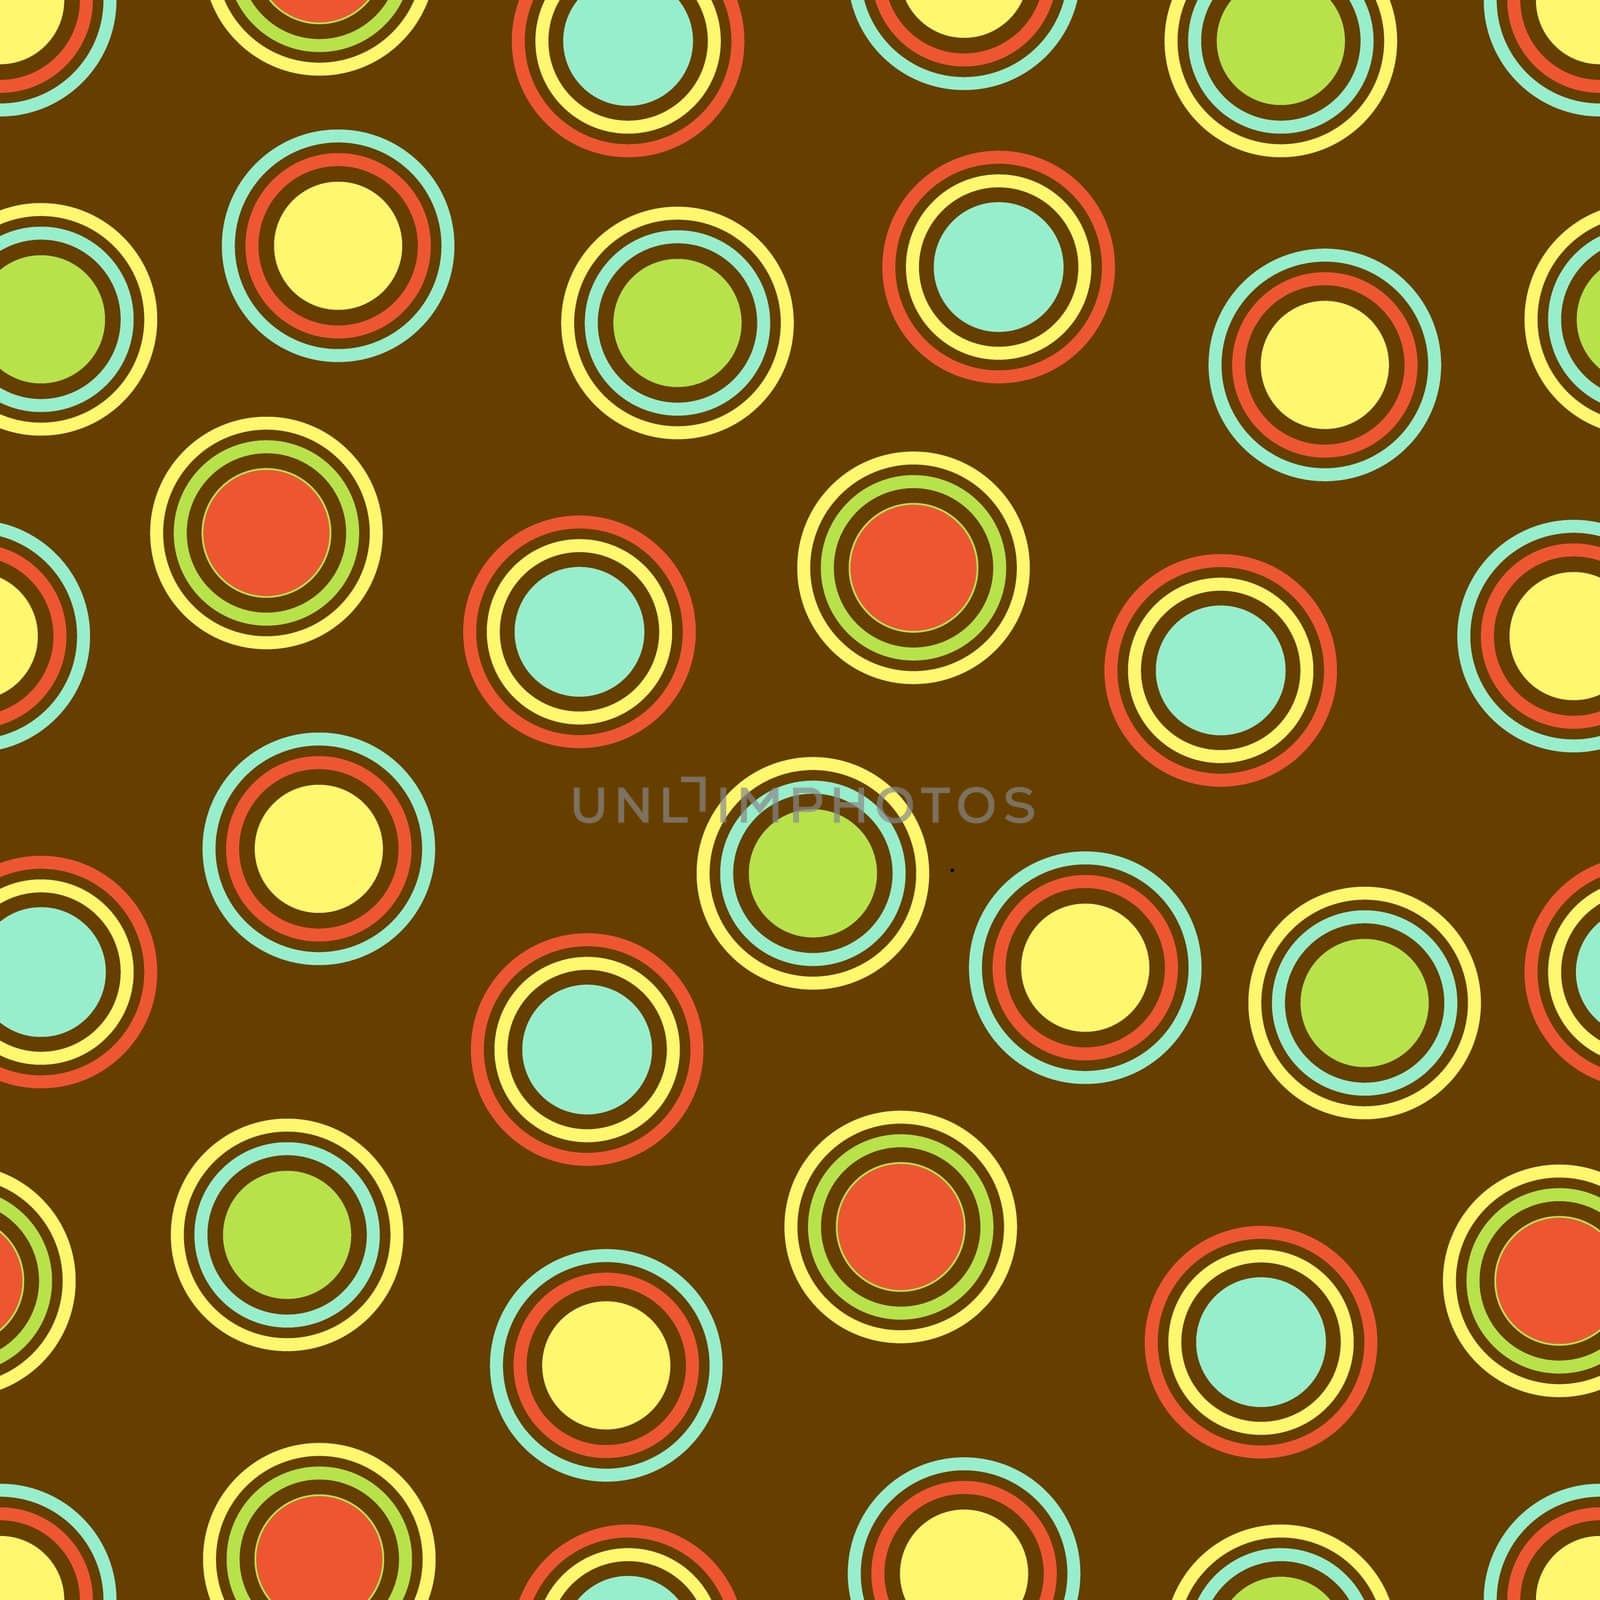 Polka Dots Background by poofy